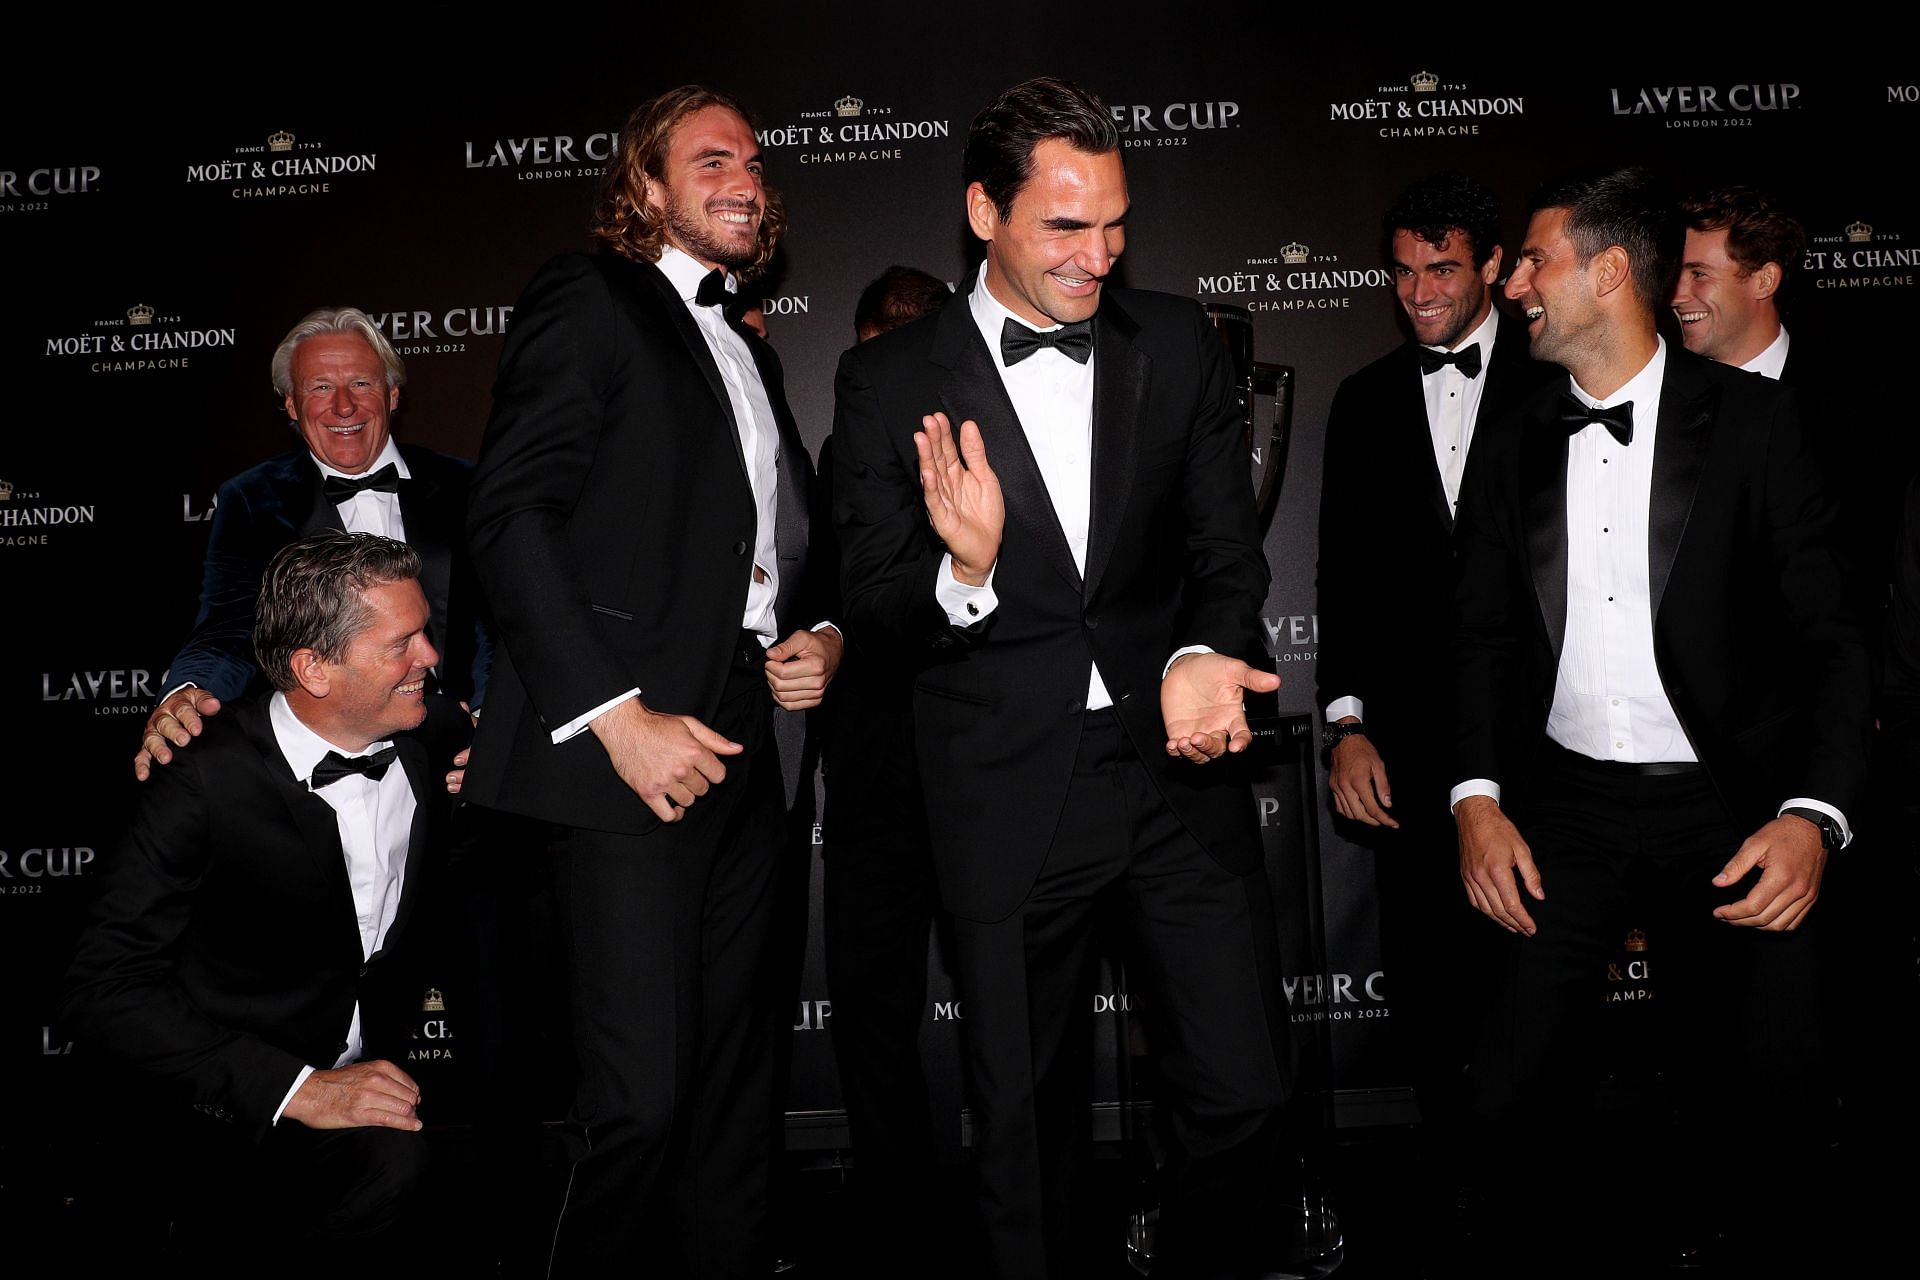 Stefanos Tsitsipas (third from left) and Roger Federer (fourth from left) share a light moment with the rest of Team Europe.